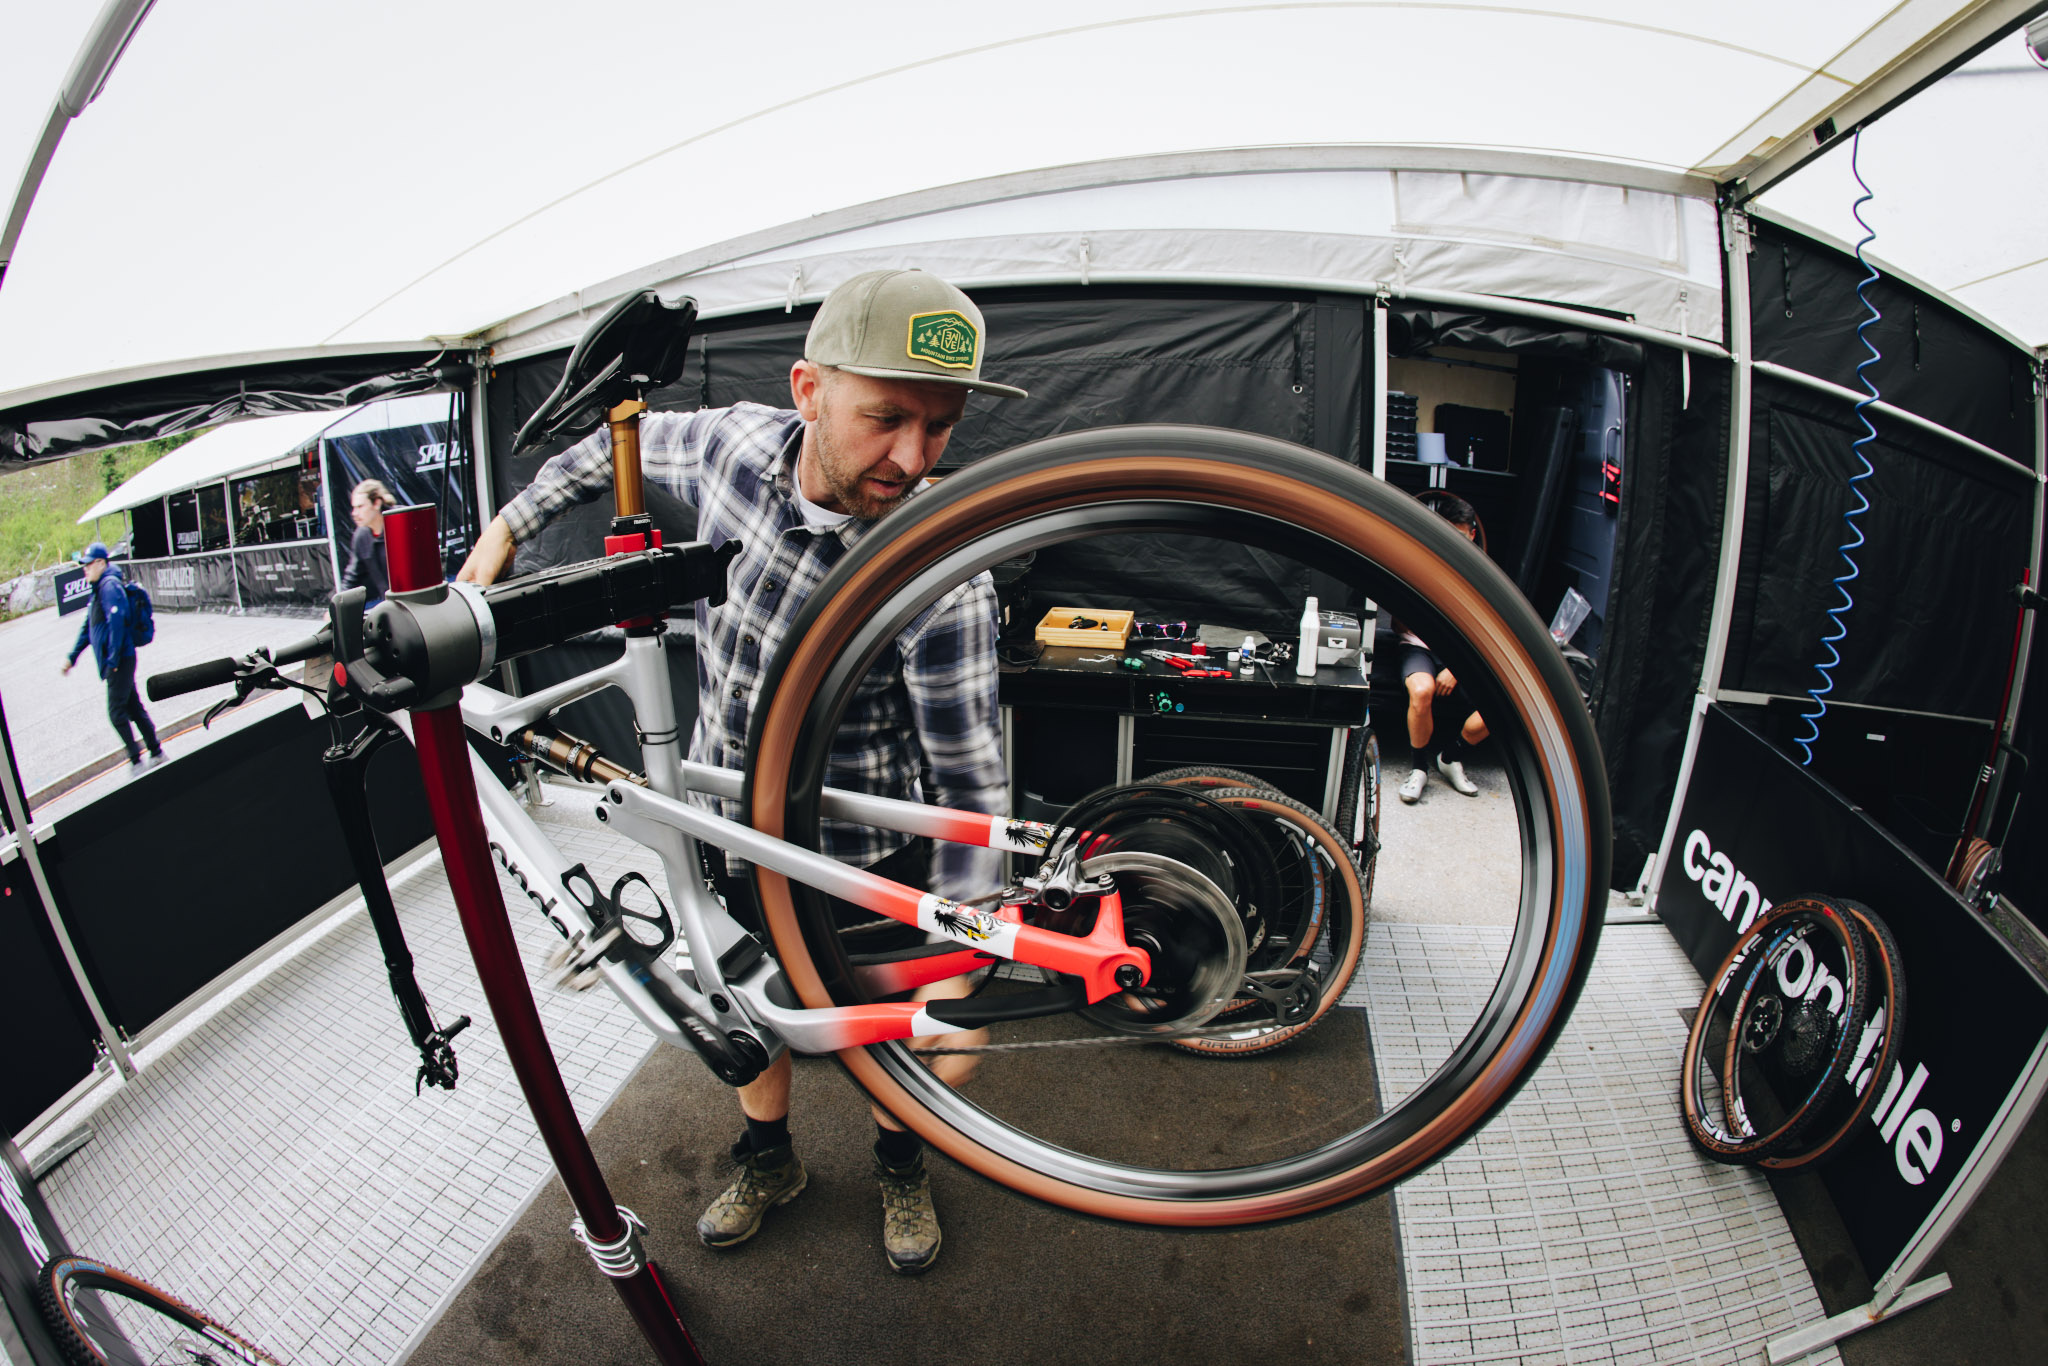 World Cup mechanic JP Jacobs on how to make your bike faster